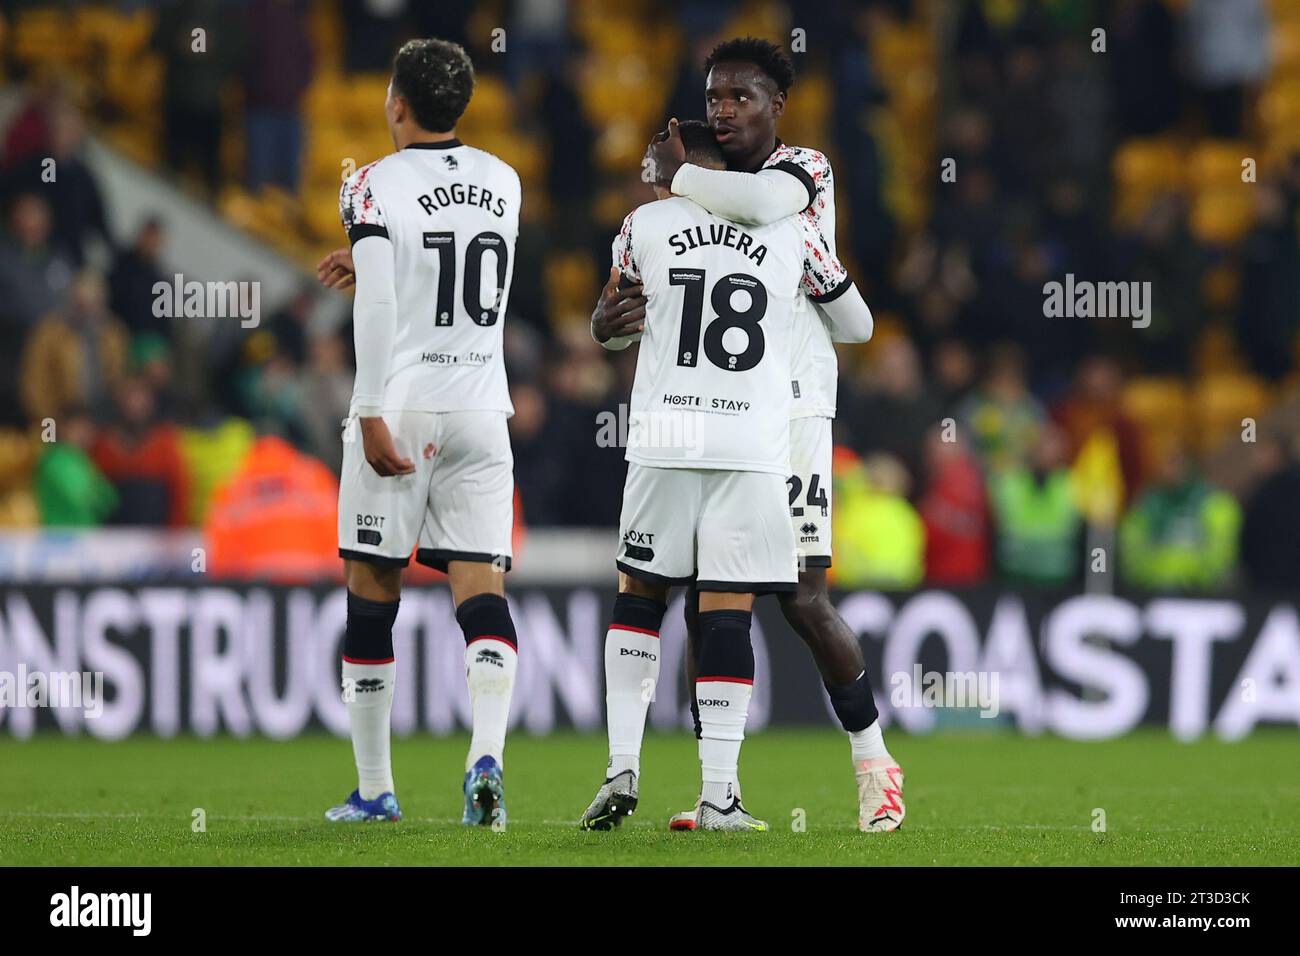 Sammy Silvera celebrates with Alex Bangura of Middlesbrough at full time during the Sky Bet Championship match Norwich City vs Middlesbrough at Carrow Road, Norwich, United Kingdom, 24th October 2023  (Photo by Ryan Crockett/News Images) Stock Photo